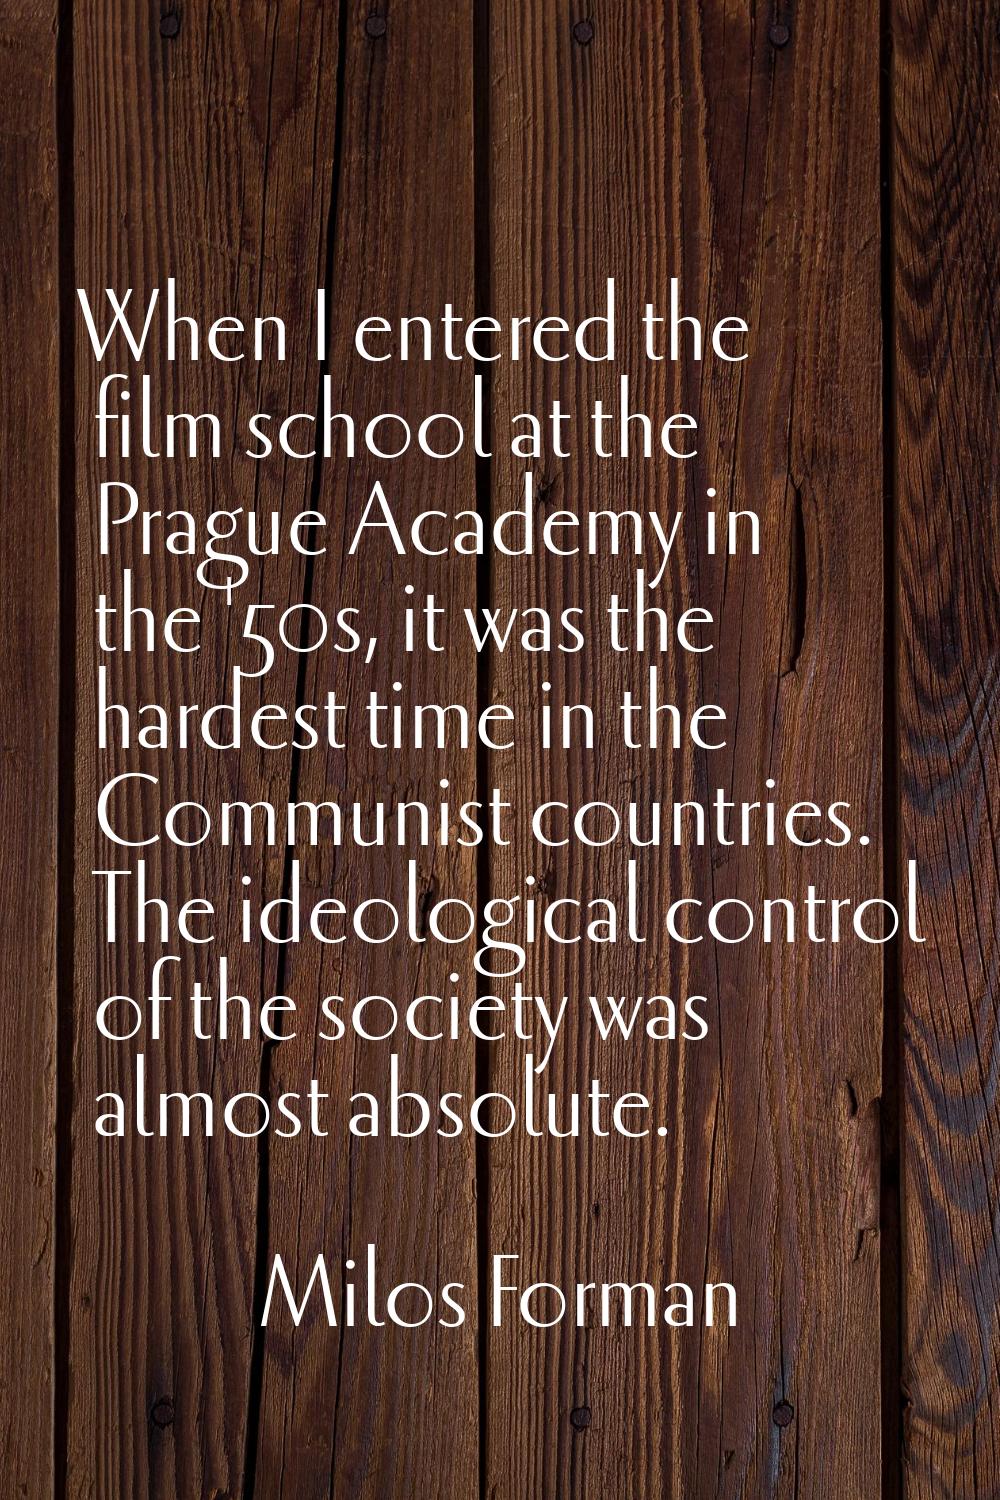 When I entered the film school at the Prague Academy in the '50s, it was the hardest time in the Co